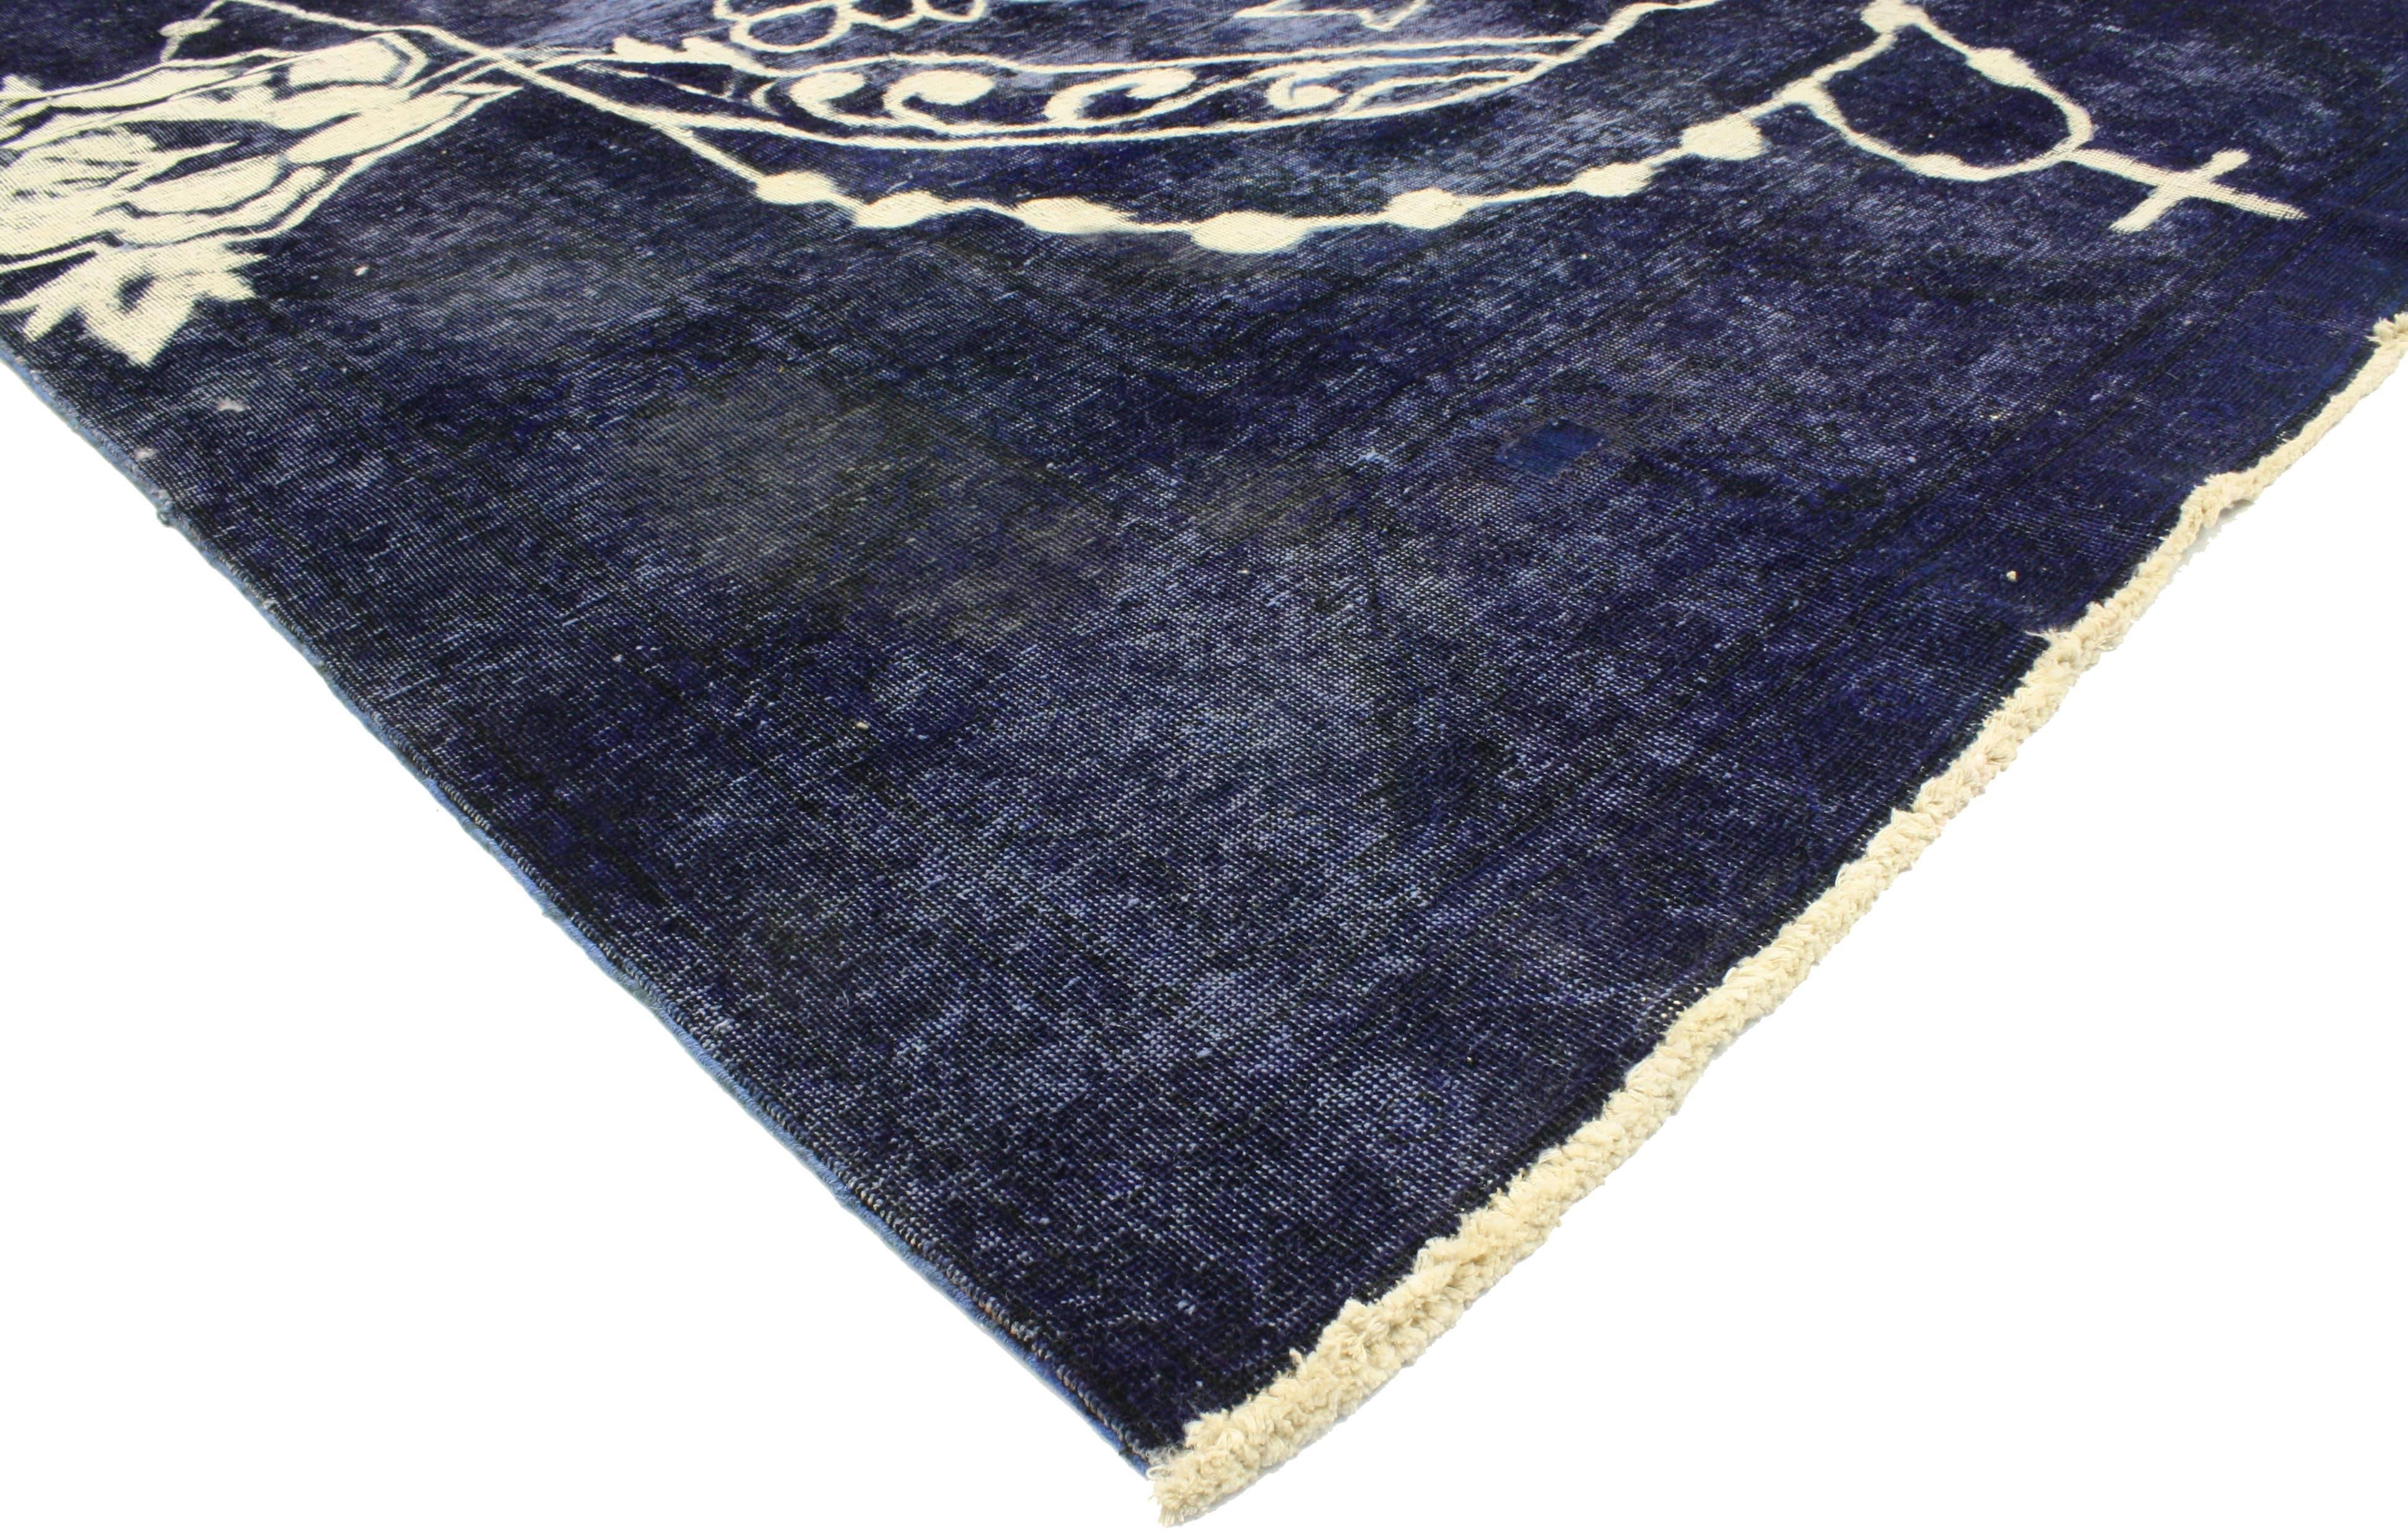 80273, Vintage Overdyed Blue Skull Rug Inspired by Alexander McQueen
07'08 x 11'02. Drawing inspiration from Alexander McQueen, Día de los Muertos, and Disney's Coco movie, this hand knotted wool distressed vintage Calavera skull area rug has been